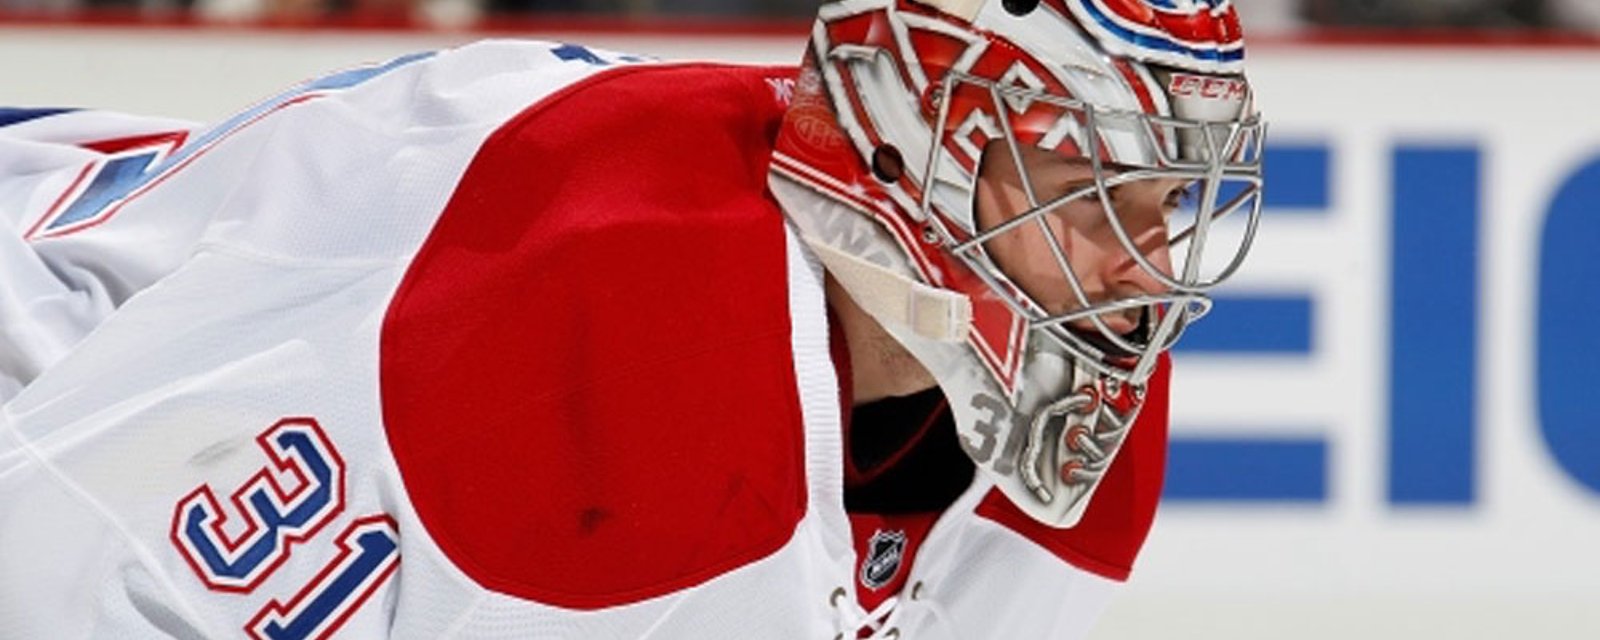 Rumor: Price to be shopped once Habs enter rebuild mode